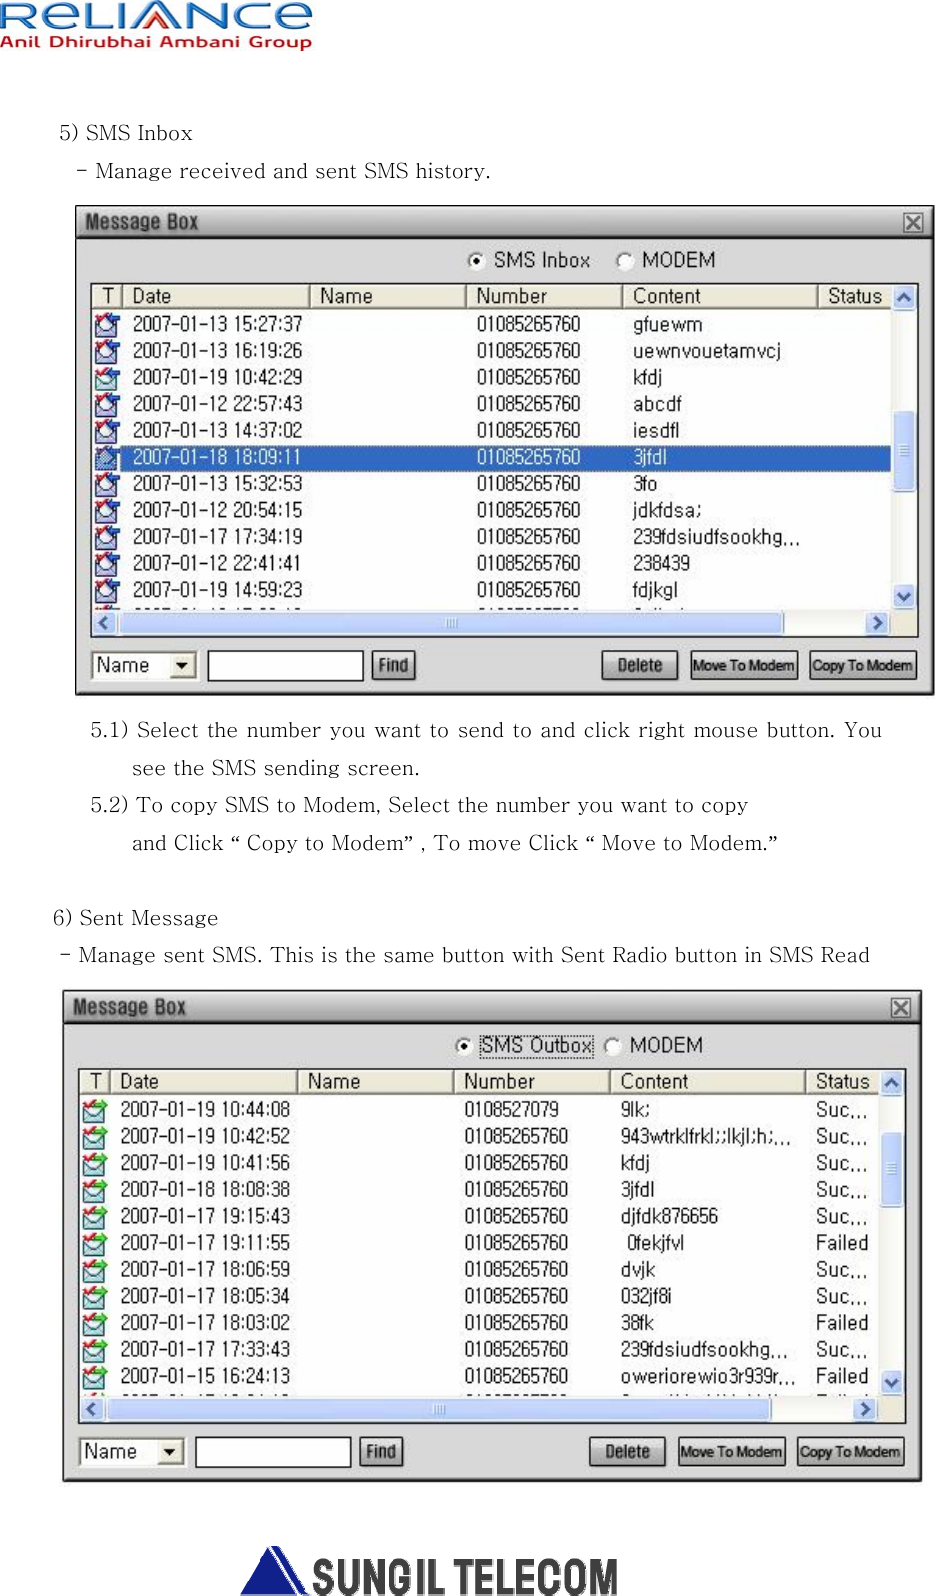   5) SMS Inbox - Manage received and sent SMS history.    5.1) Select the number you want to send to and click right mouse button. You see the SMS sending screen. 5.2) To copy SMS to Modem, Select the number you want to copy     and Click “ Copy to Modem” , To move Click “ Move to Modem.”     6) Sent Message - Manage sent SMS. This is the same button with Sent Radio button in SMS Read   